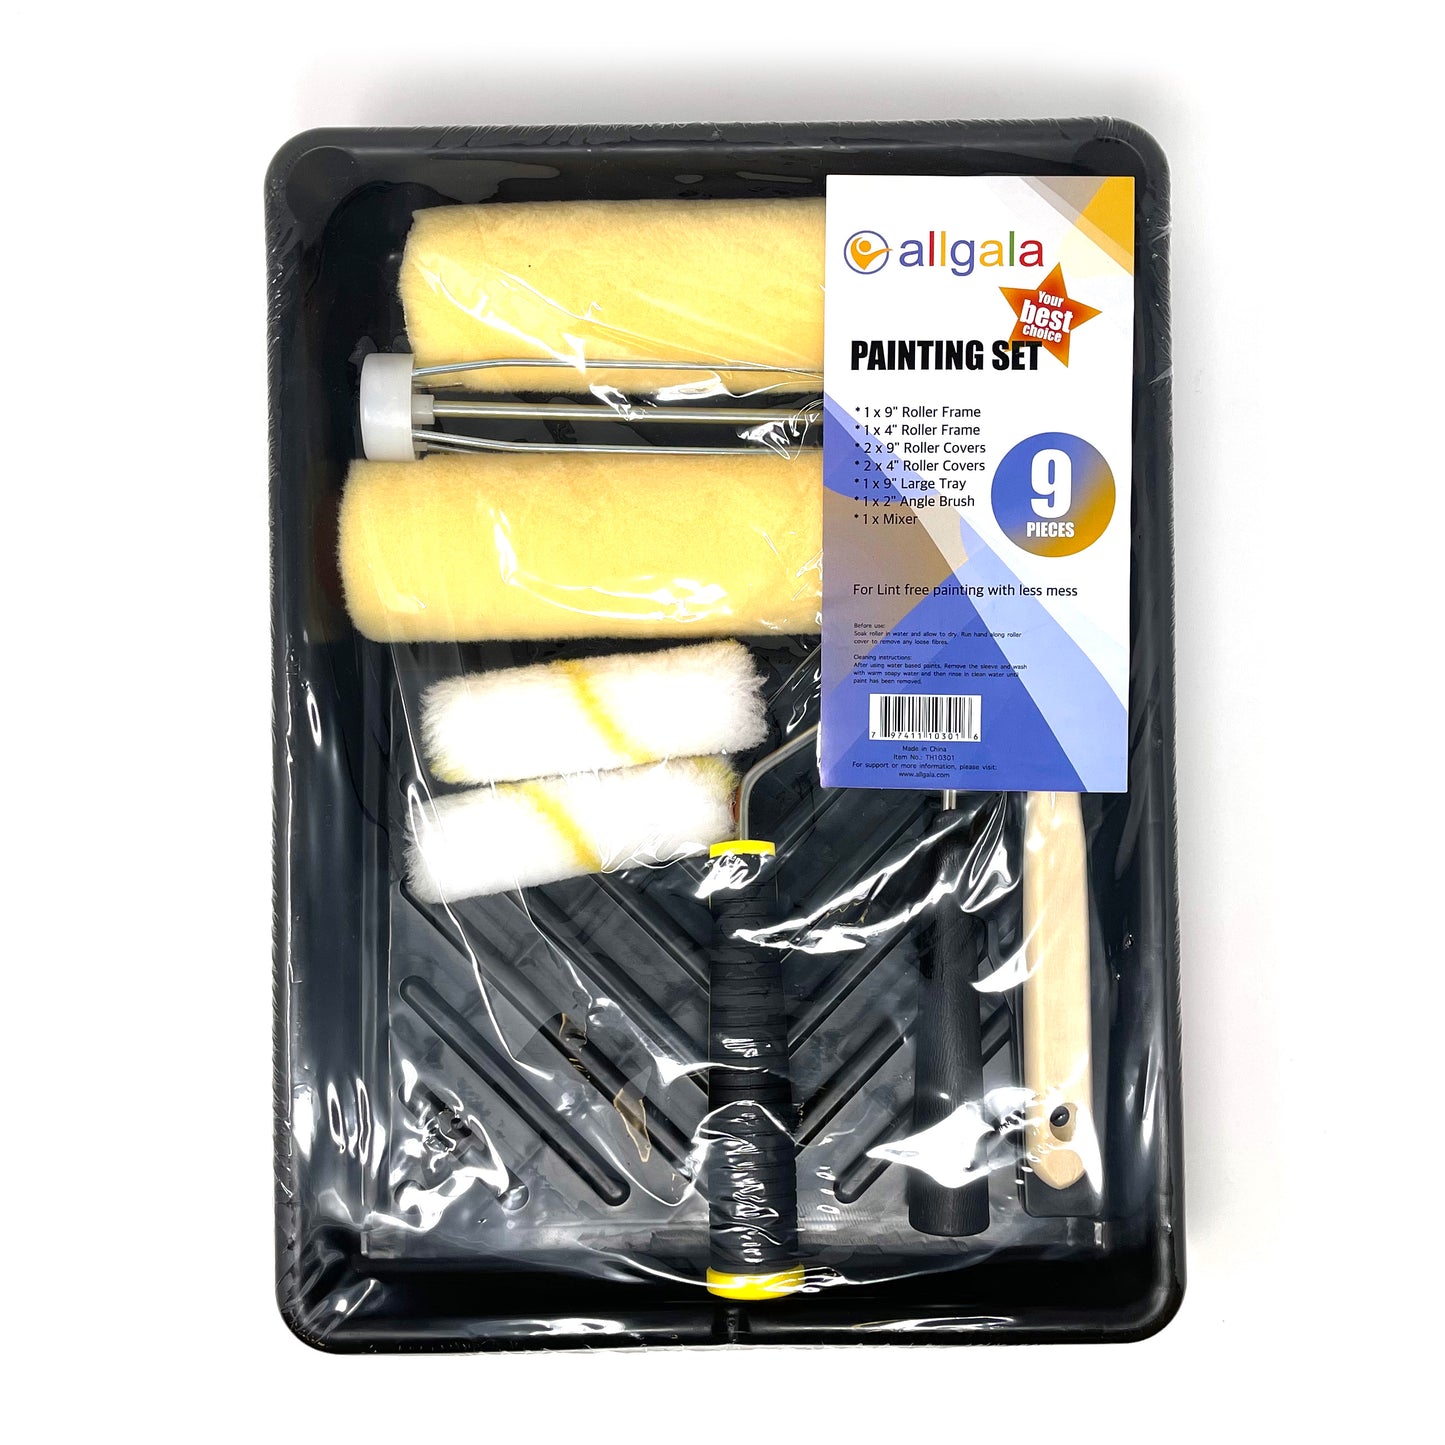 Allgala Paint Kit 9-Piece Lint Free Paint Roller Kit with Roller Frames Covers Brush Mixer and Large Tray - TH10301